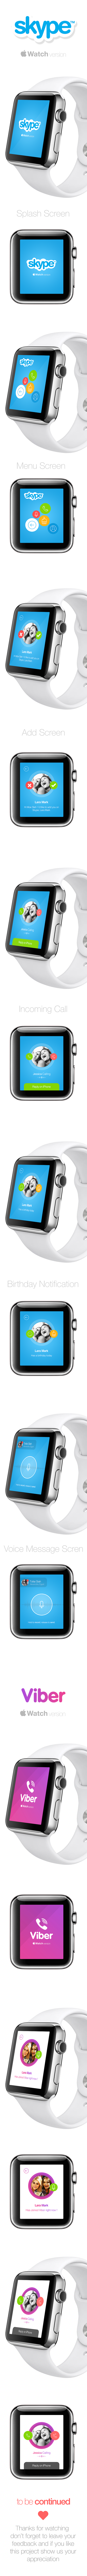 Apple Watch with Sky...